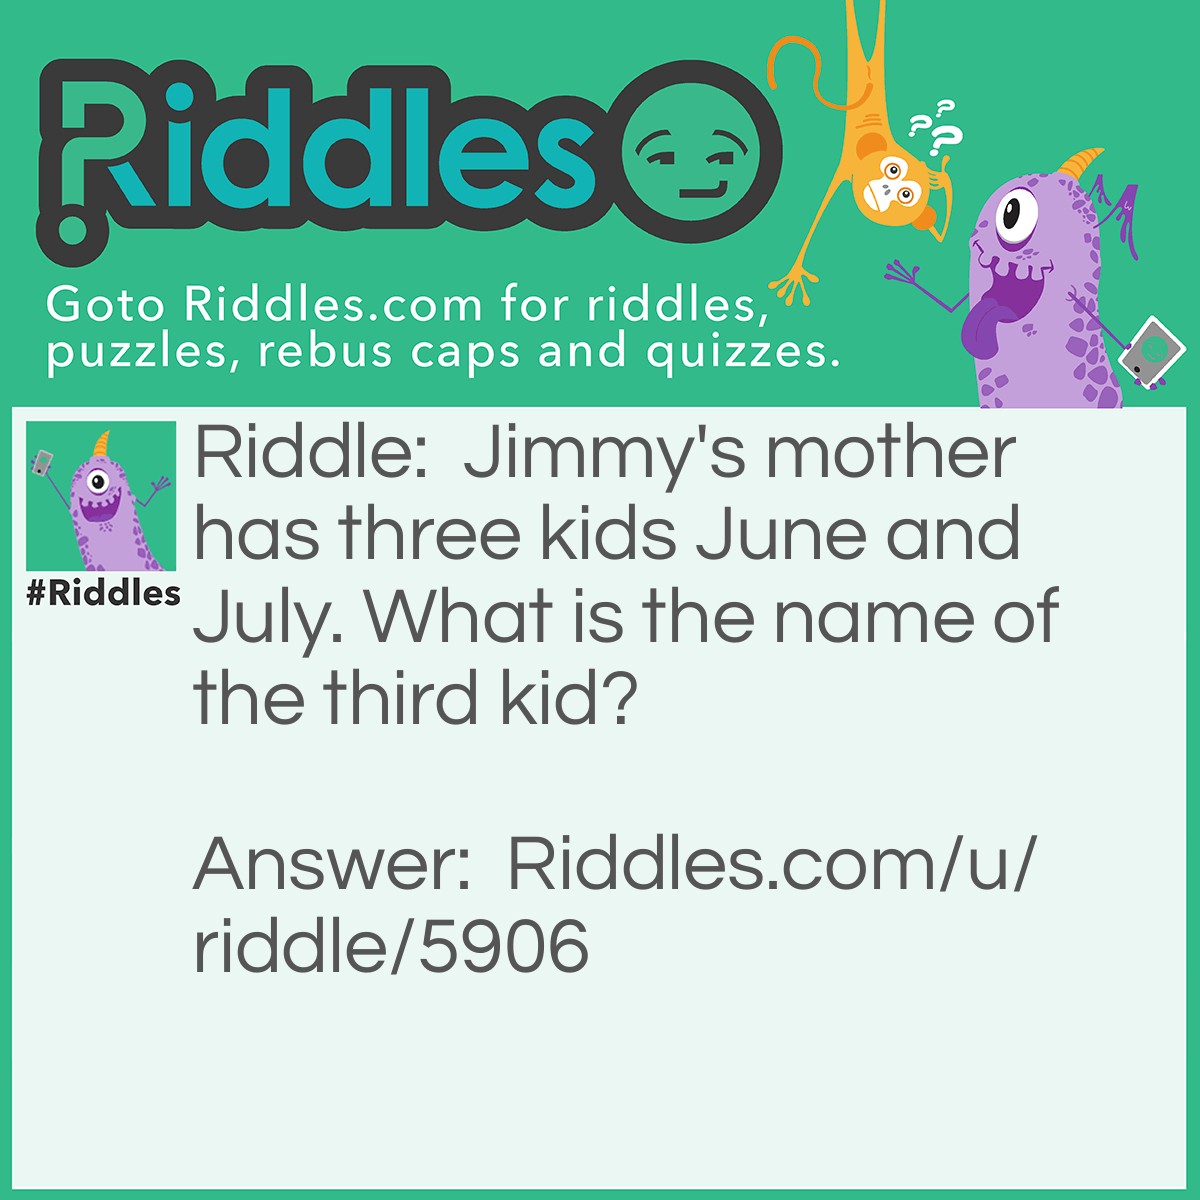 Riddle: Jimmy's mother has three kids June and July. What is the name of the third kid? Answer: Jimmy.